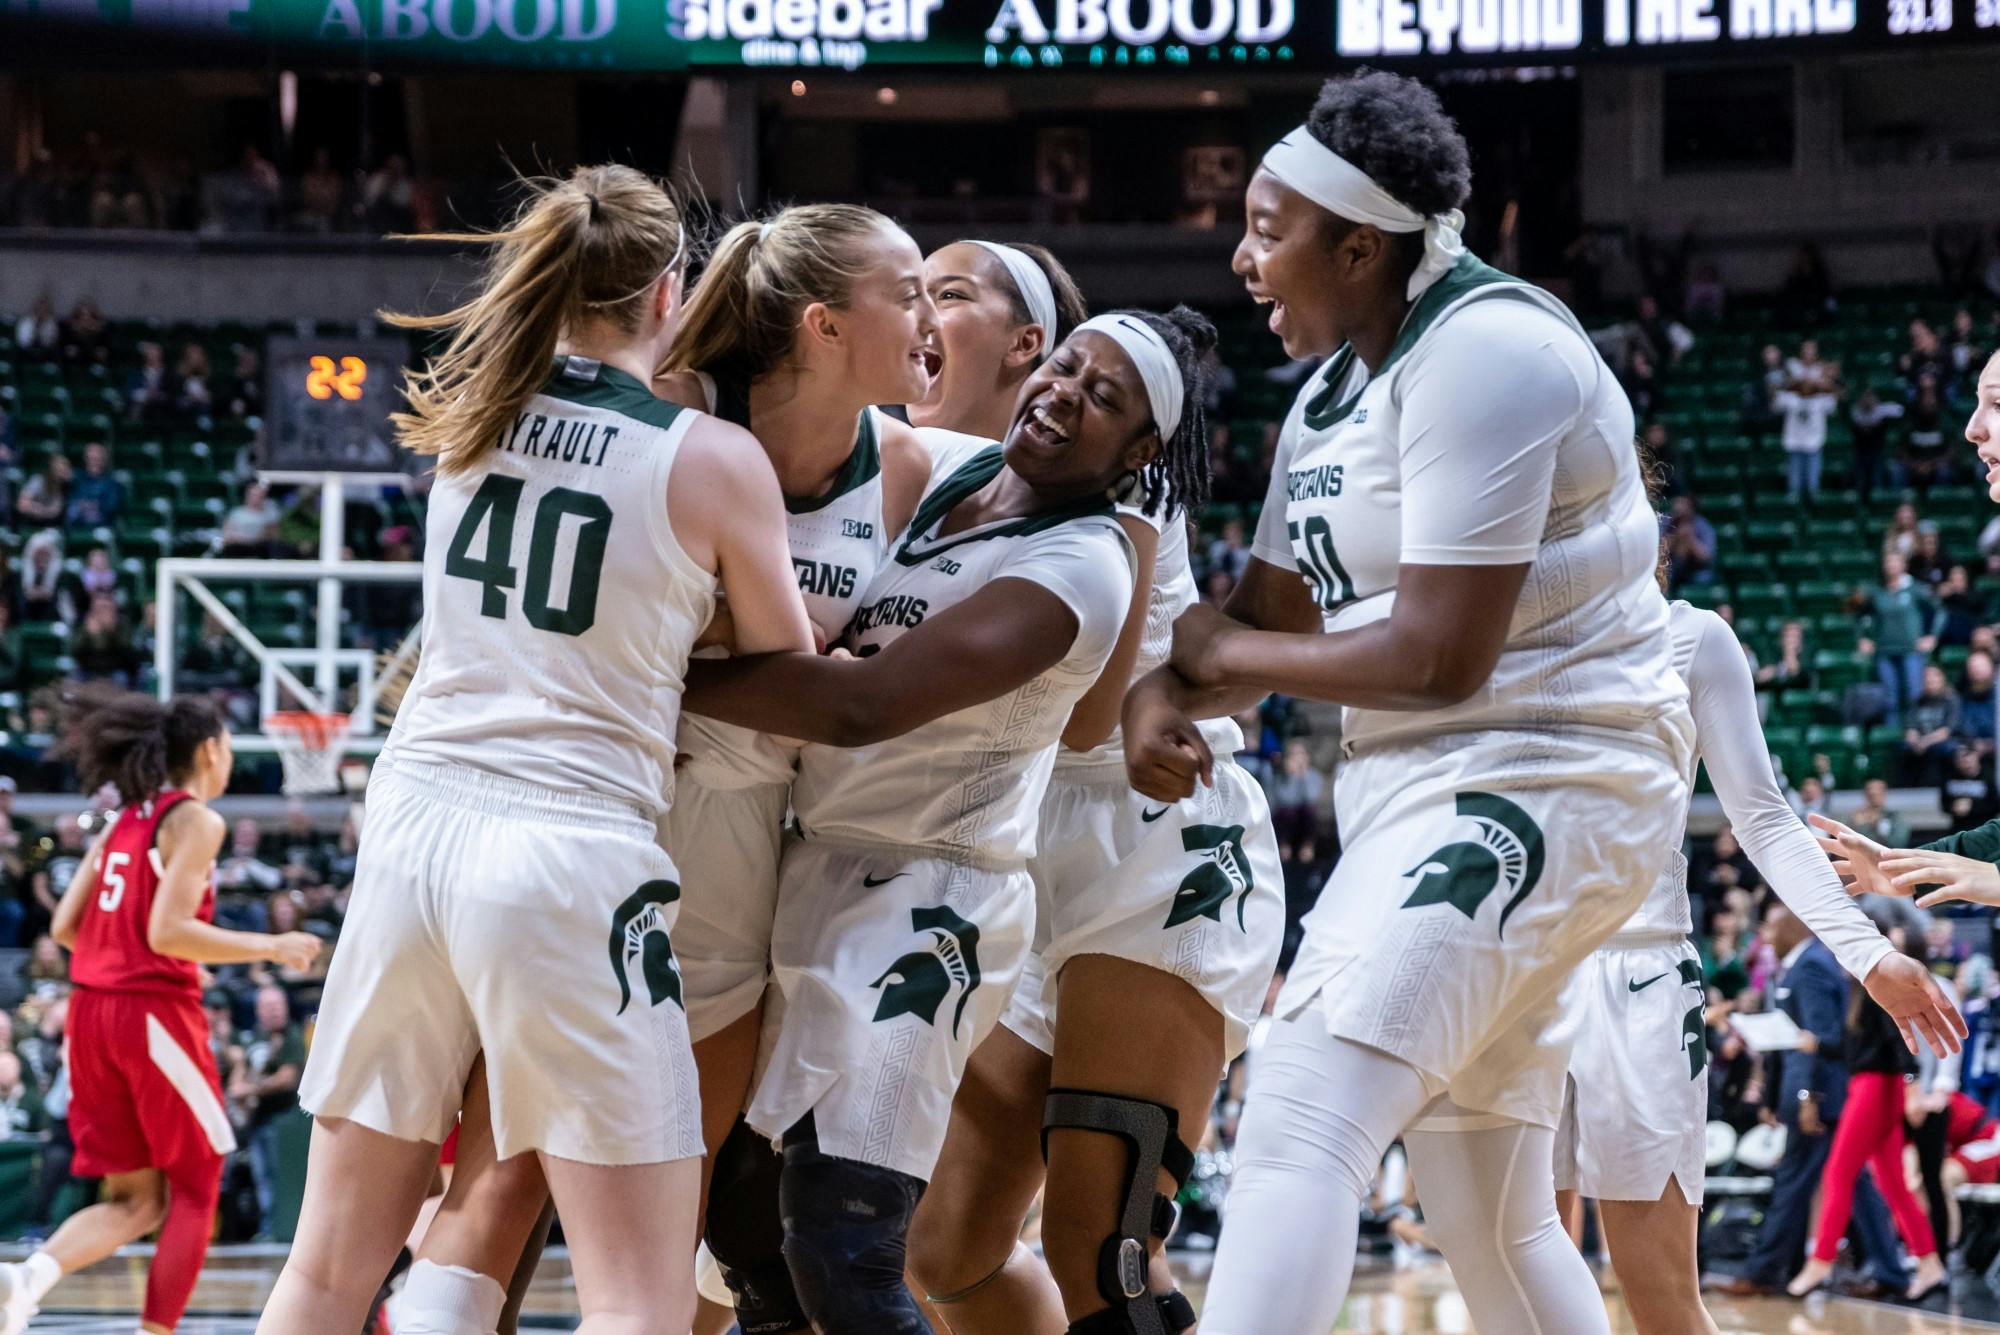 <p>The MSU women’s basketball team celebrates coming back against Nebraska. The Spartans defeated the Cornhuskers, 78-70, at the Breslin Student Events Center on Dec. 31, 2019.</p>